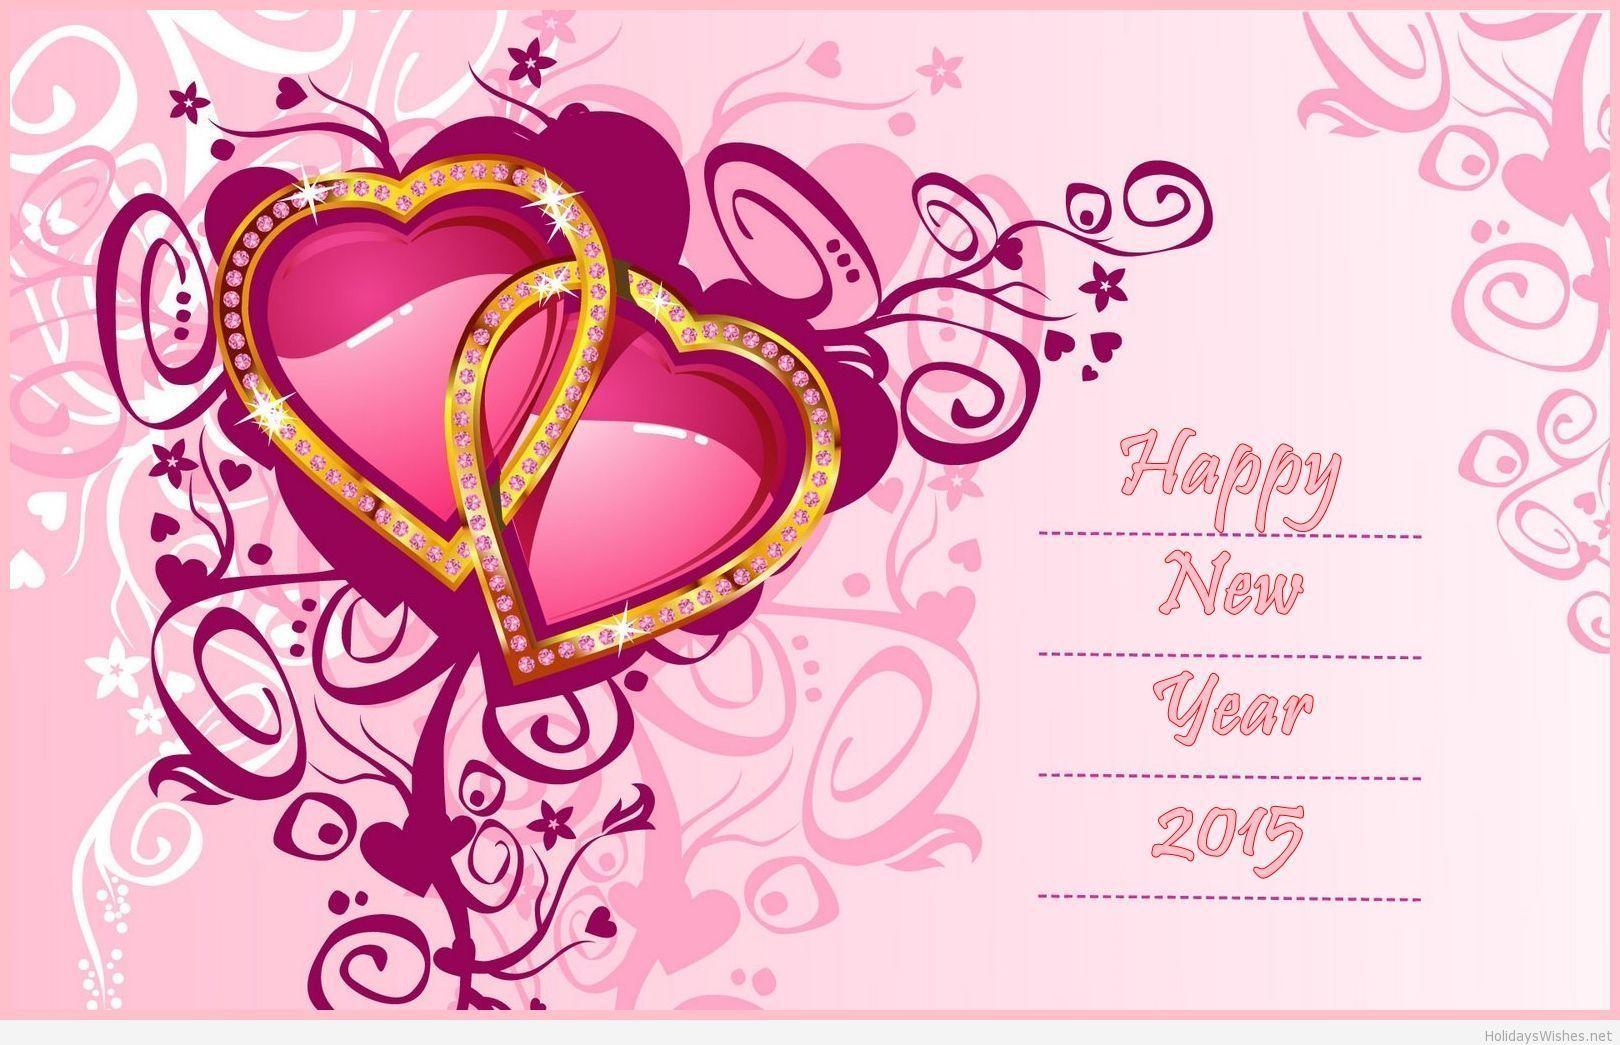 Love animation wallpaper card for new year 2015